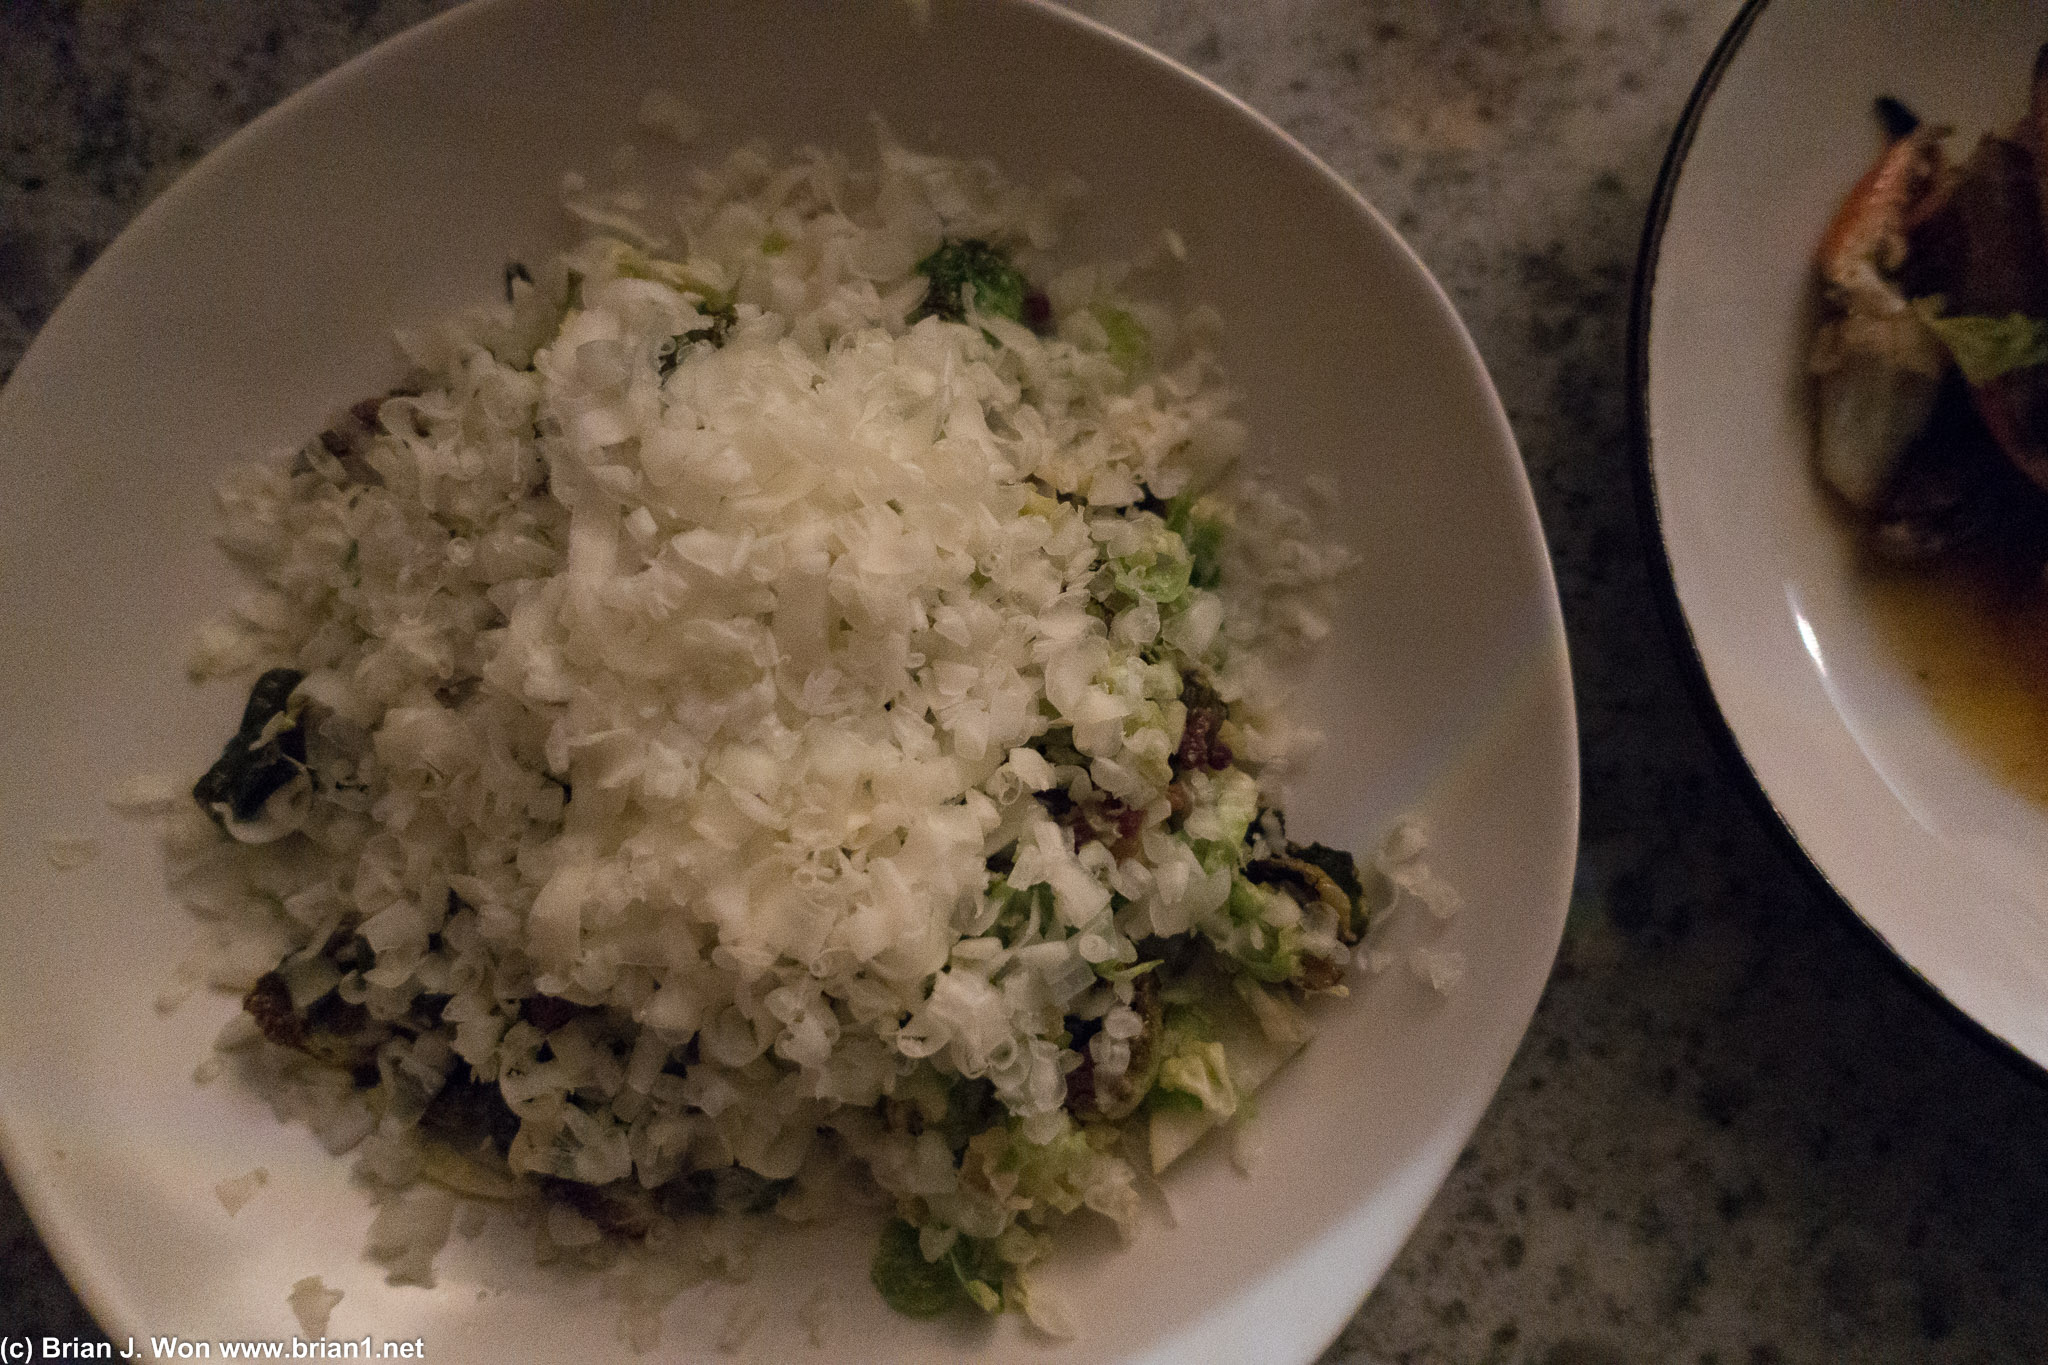 Brussels sprouts salad. Covered in a very light cheese that surprisingly, worked very well.